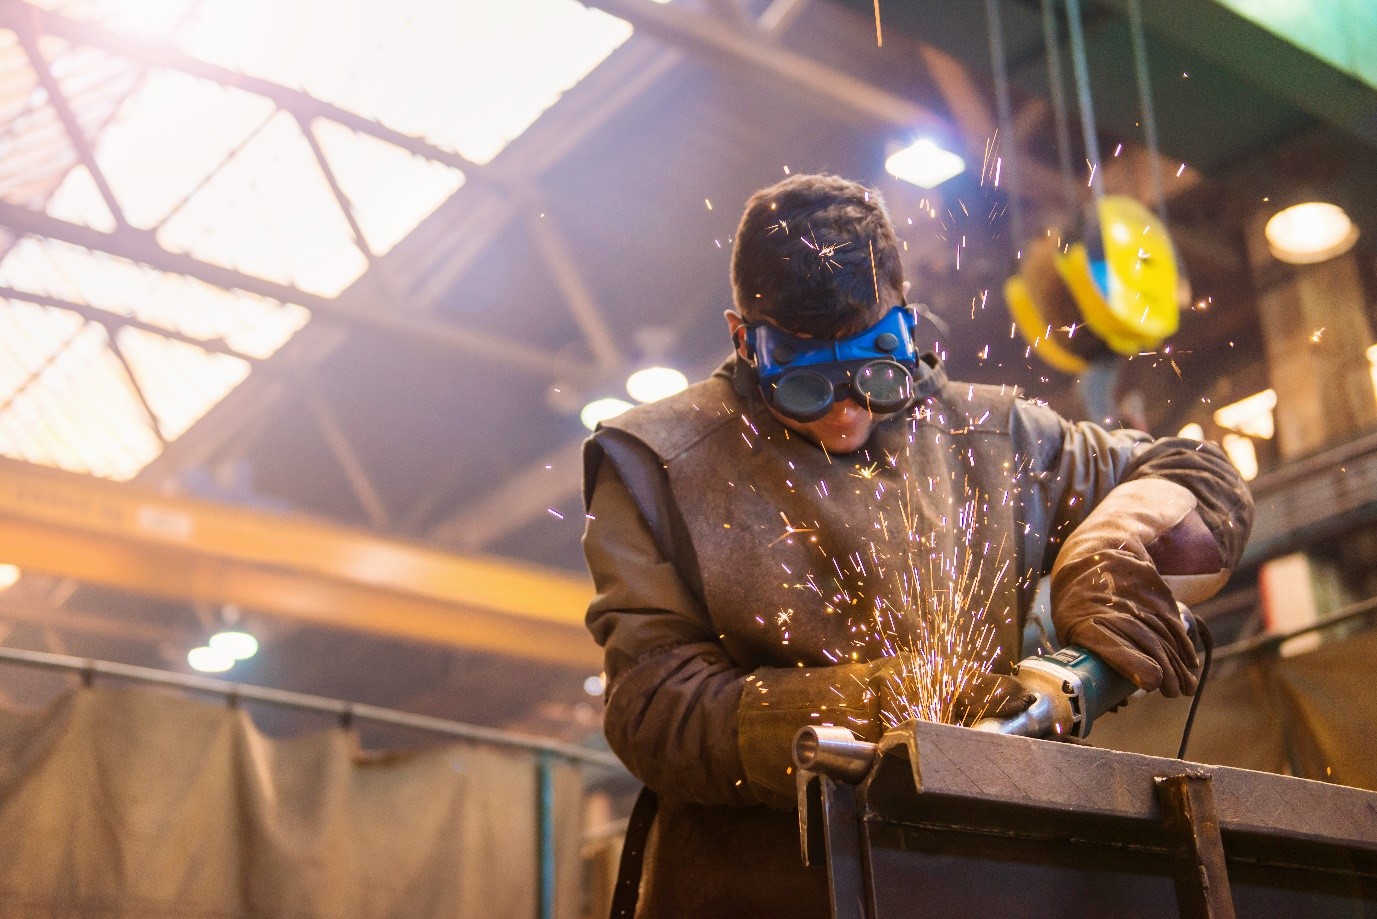 What’s It Like to Be a Boilermaker and Welder? Employment Training